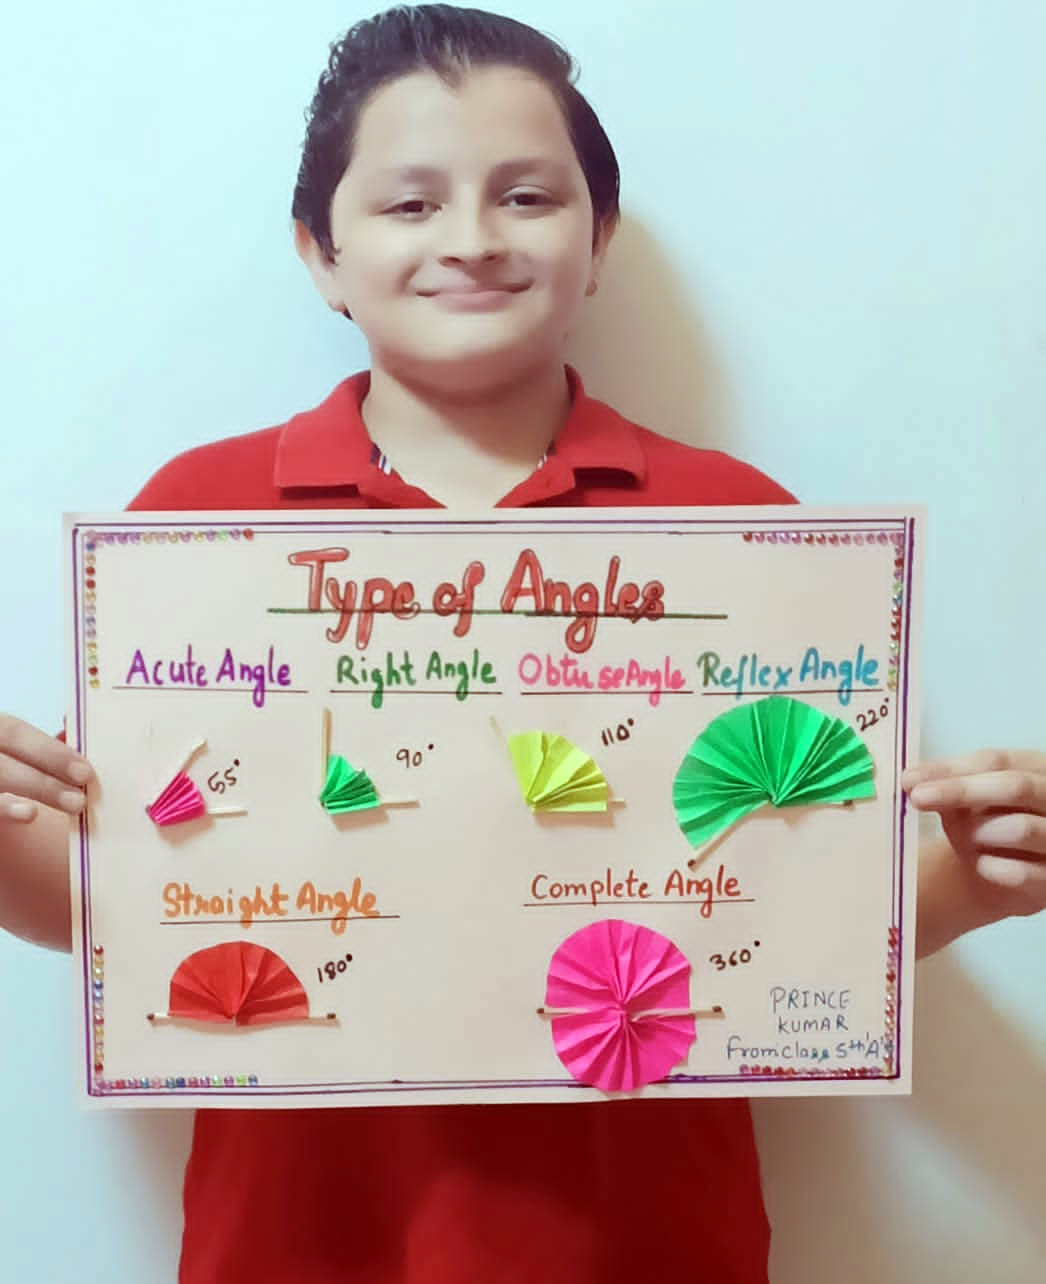 Presidium Dwarka-6, STUDENTS LEARN ABOUT THE DIFFERENT ANGLES WITH FUN ACTIVITY